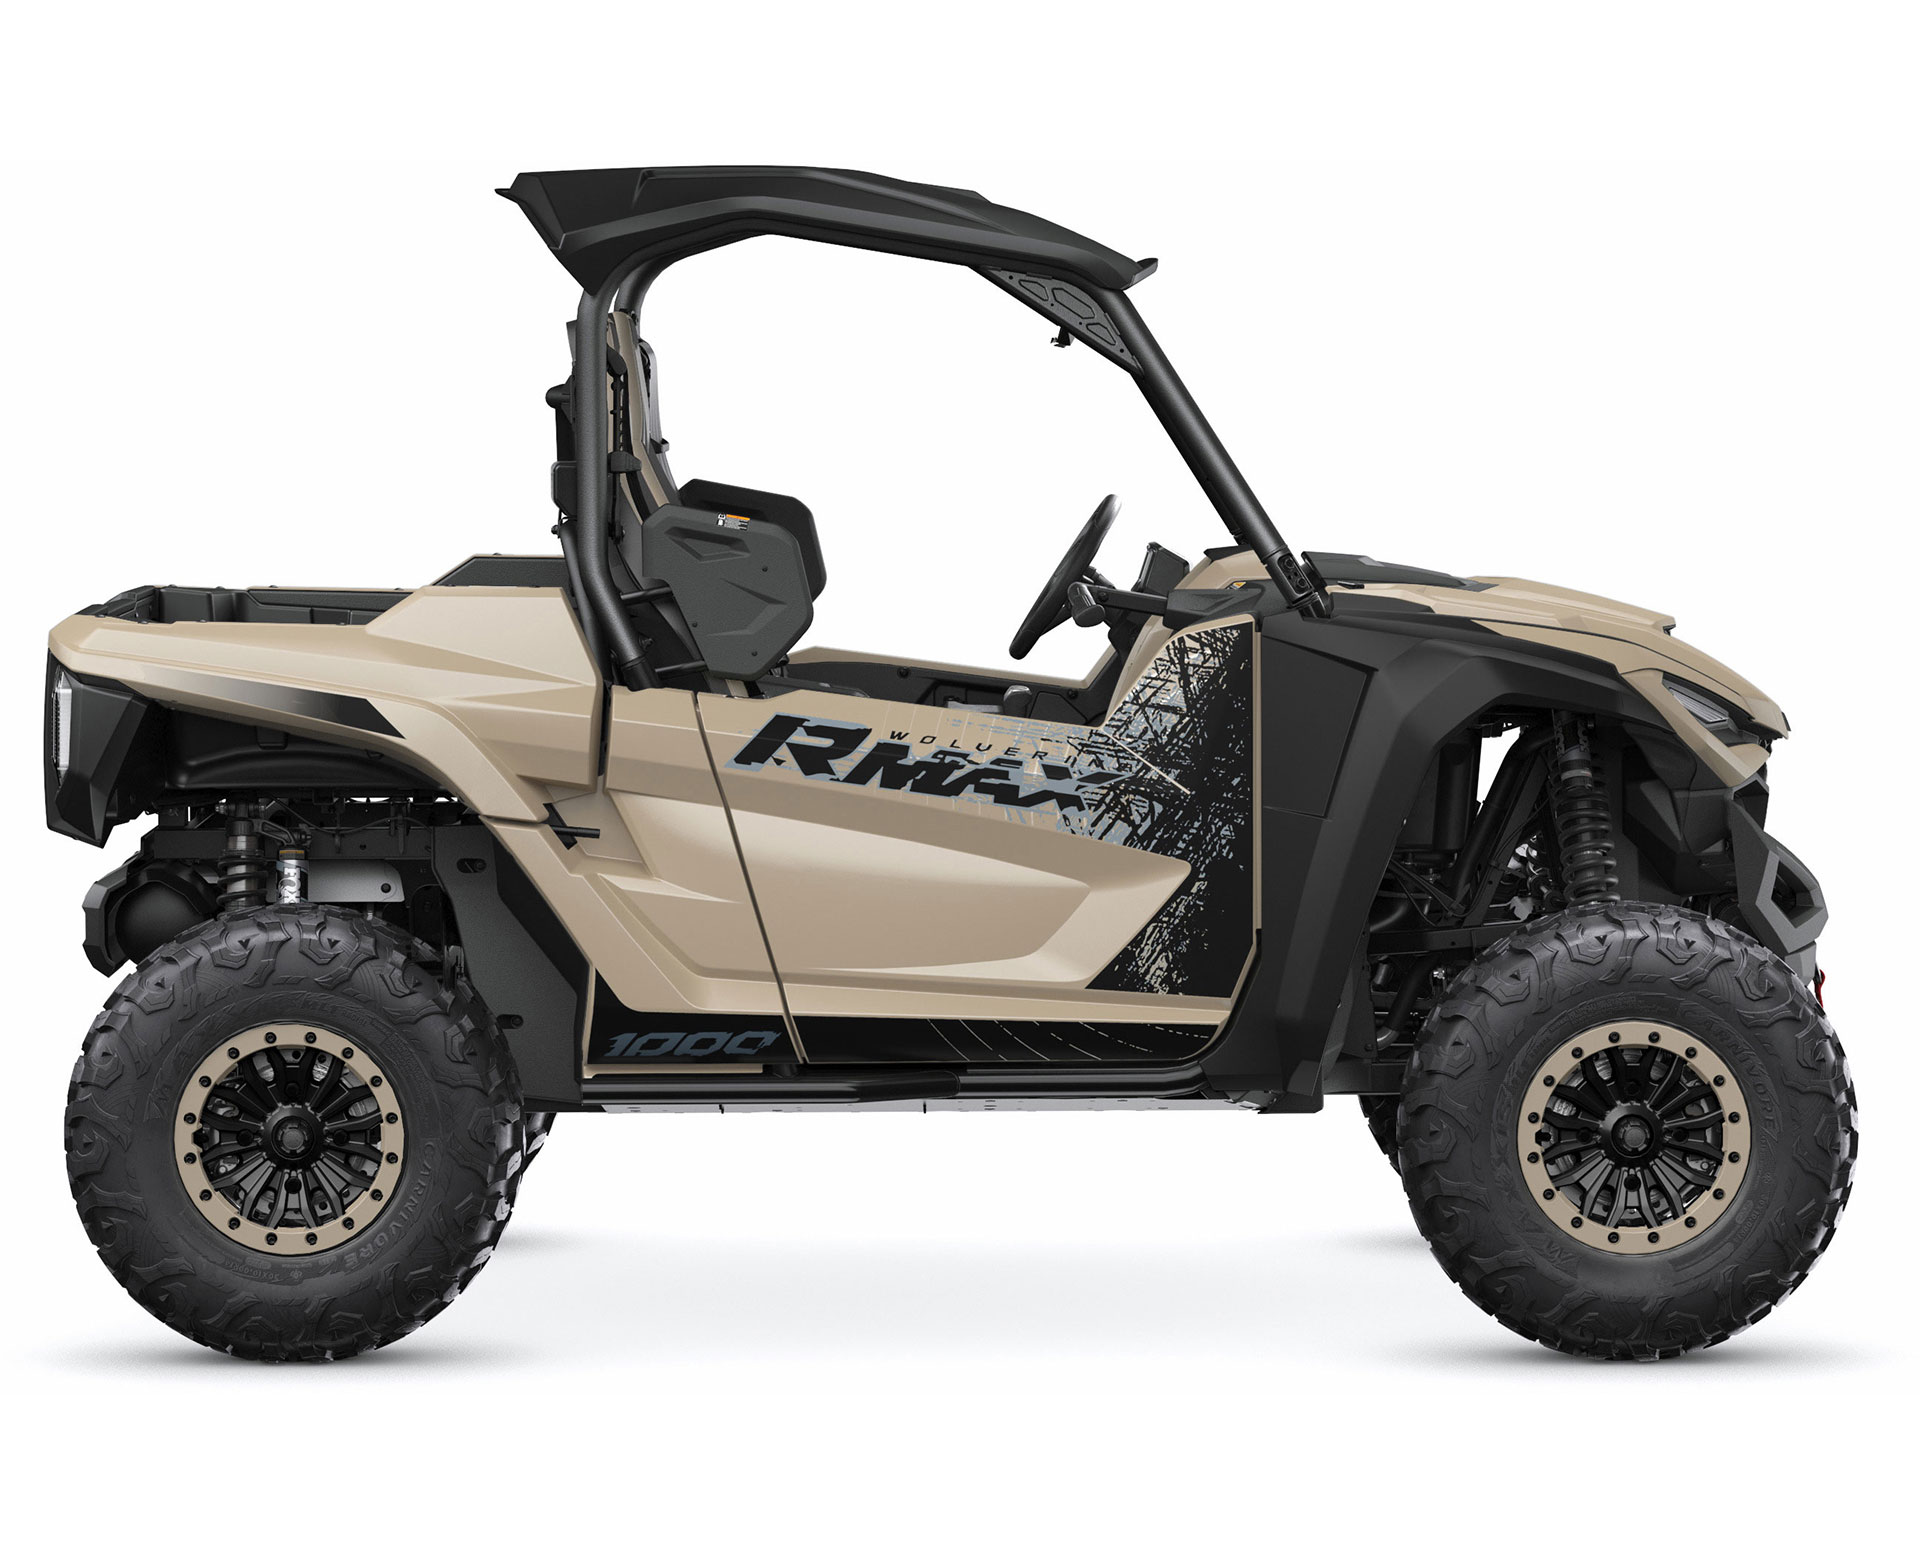 Thumbnail of your customized 2023 WOLVERINE® RMAX2™ 1000 SE